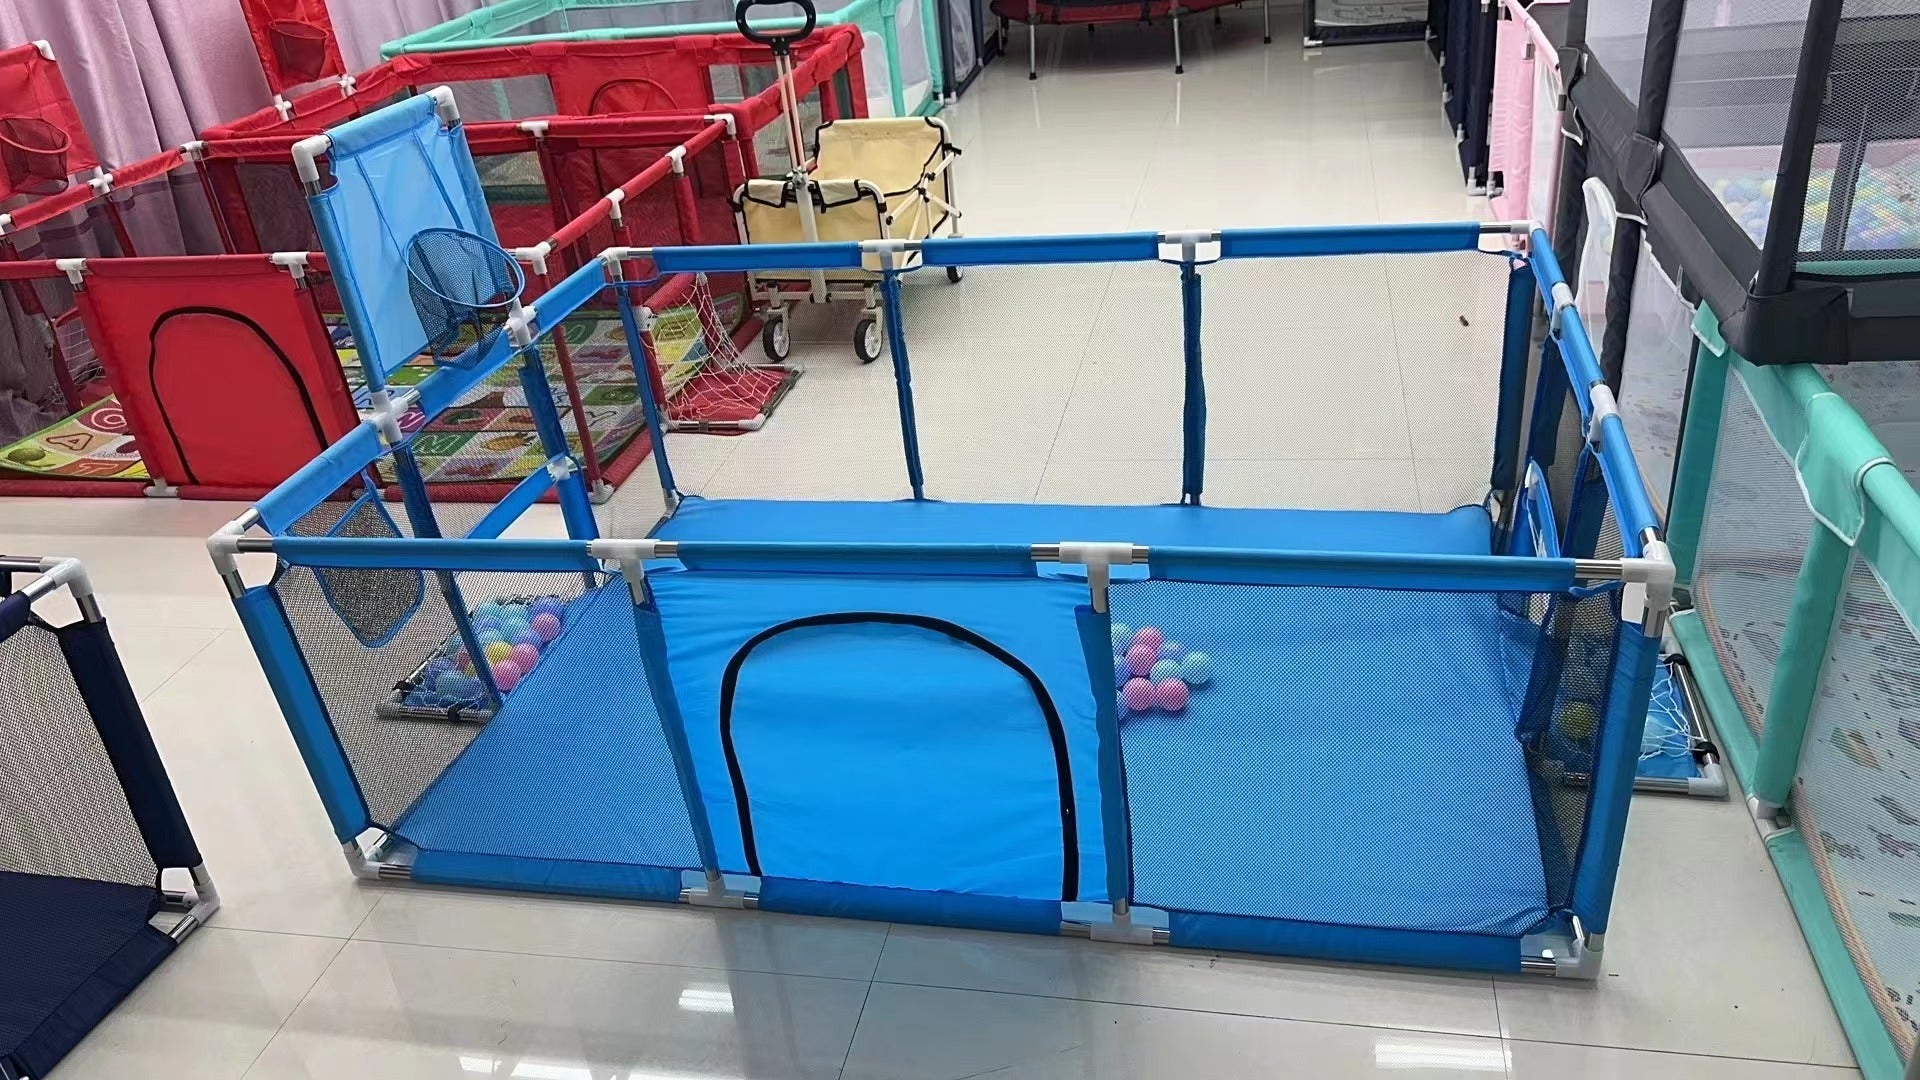 Children's fence baby basketball fence safety stainless steel playpen children's ball pit baby indoor playground baby park fence